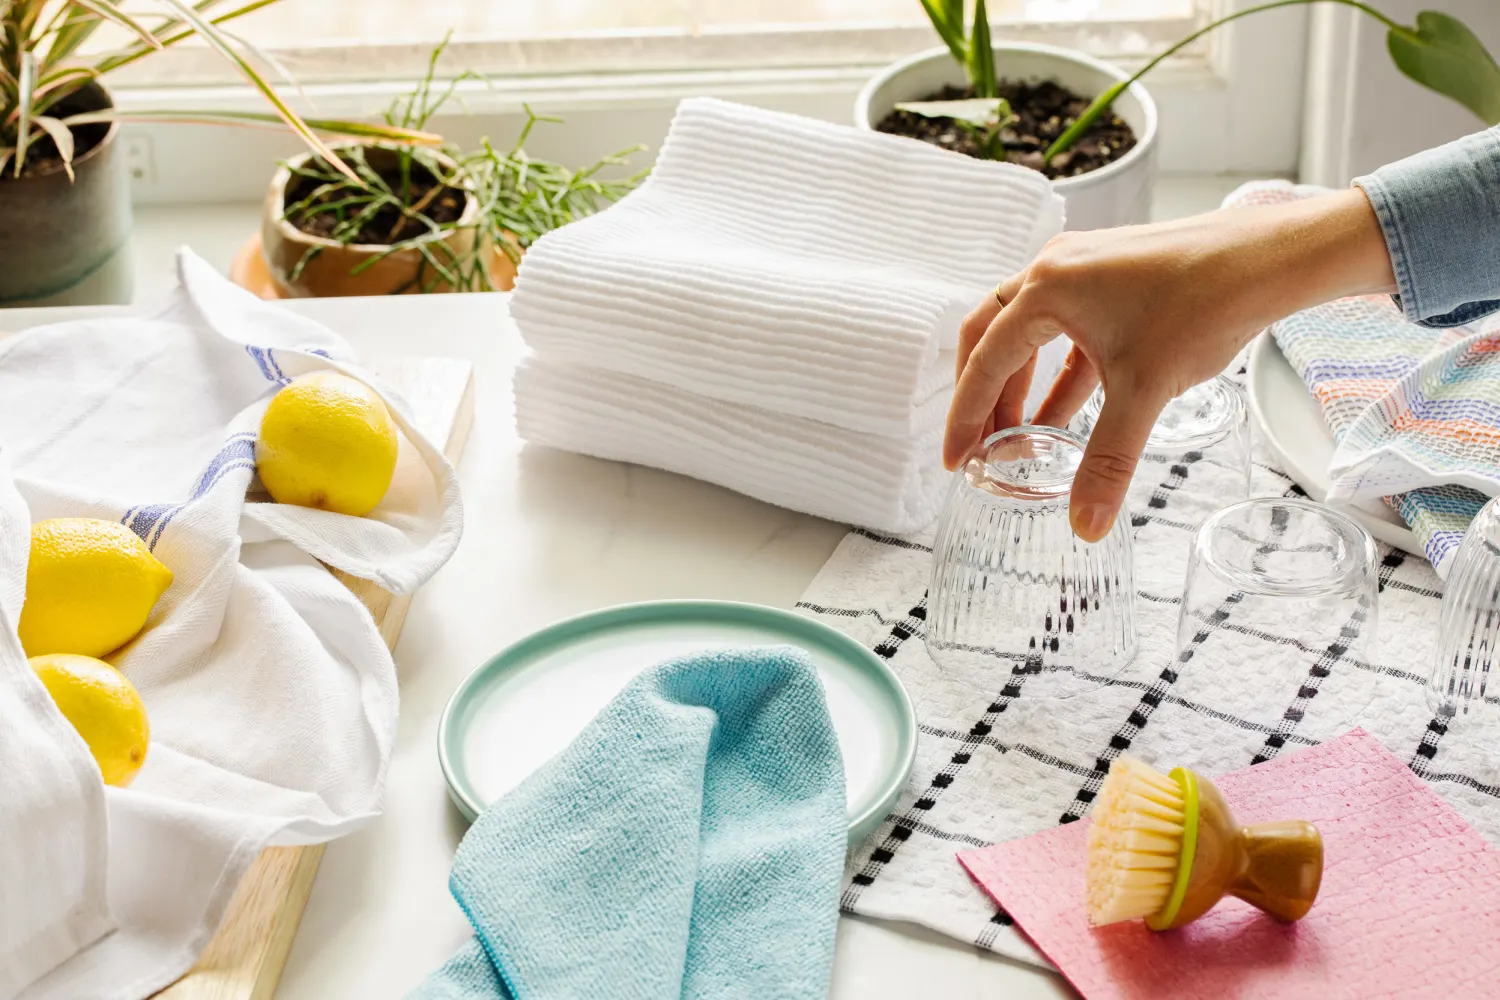 Benefits and Uses of Flour Sack Towels